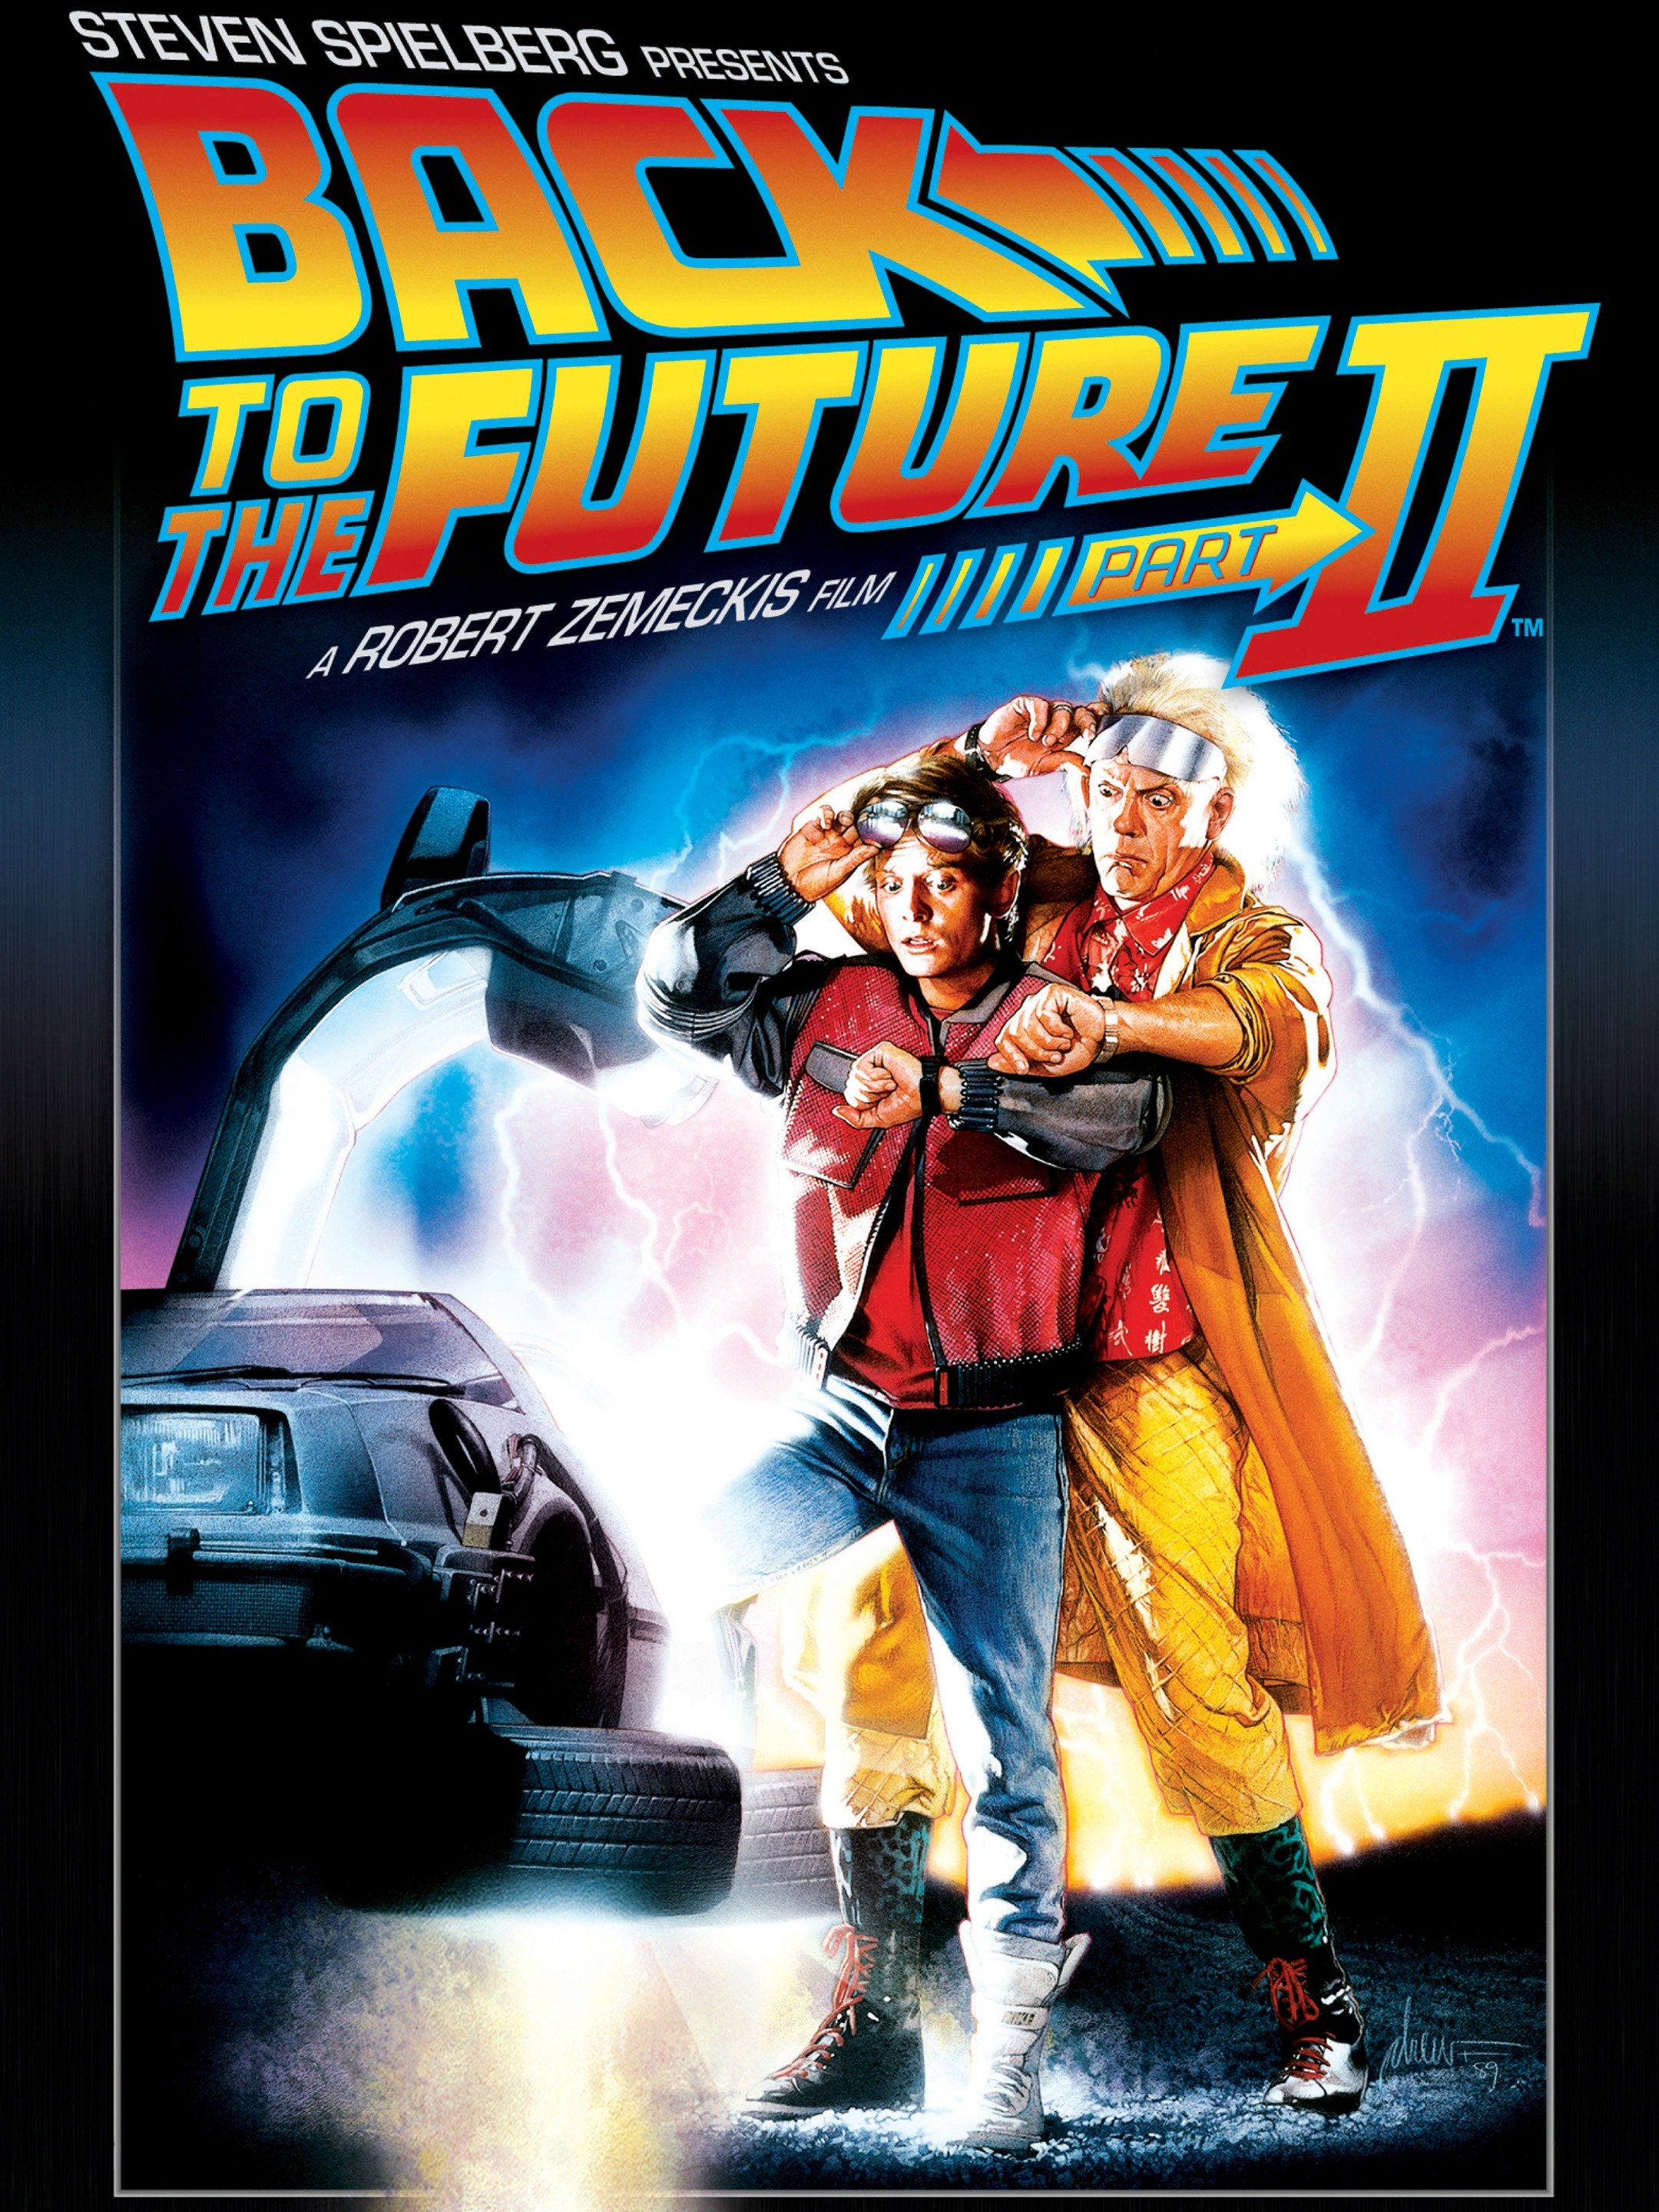 Back to the Future Part II (1989) - Rotten Tomatoes